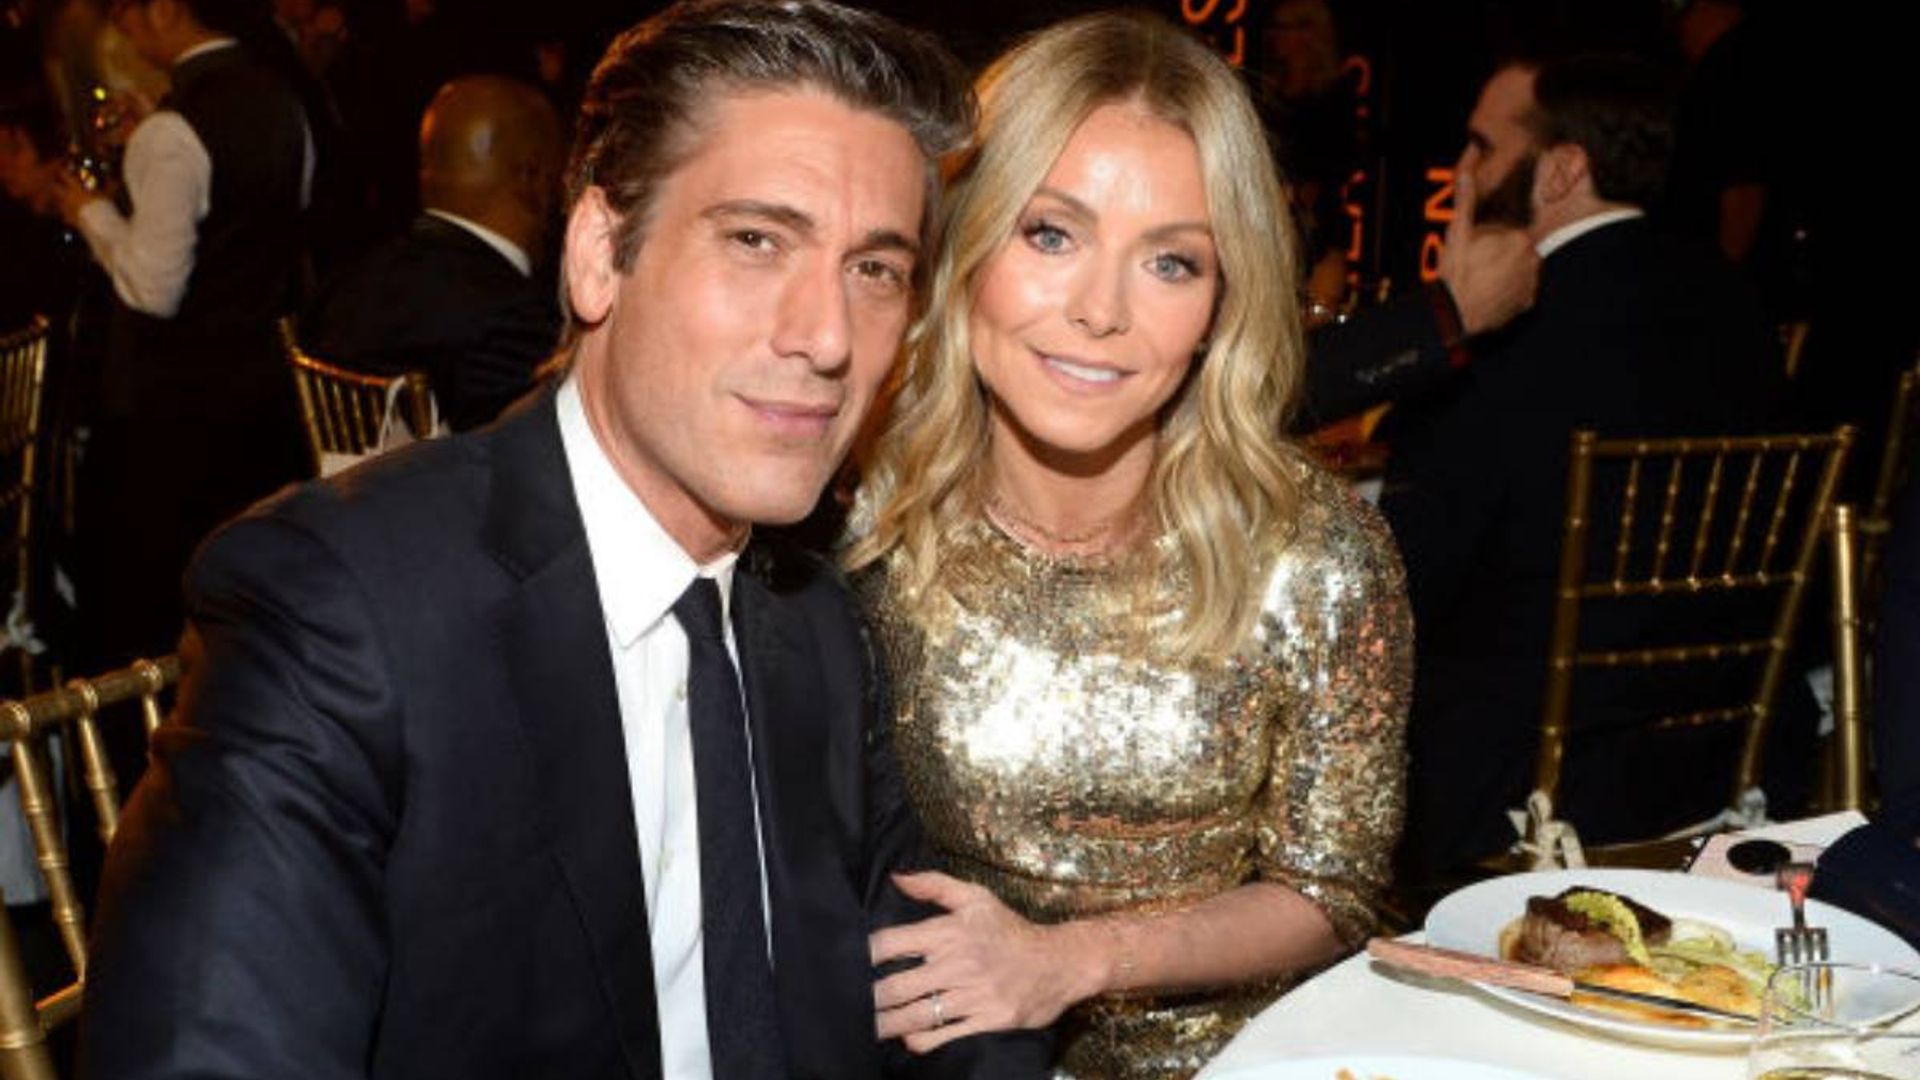 David Muir shows support for Kelly Ripa's son in the best way